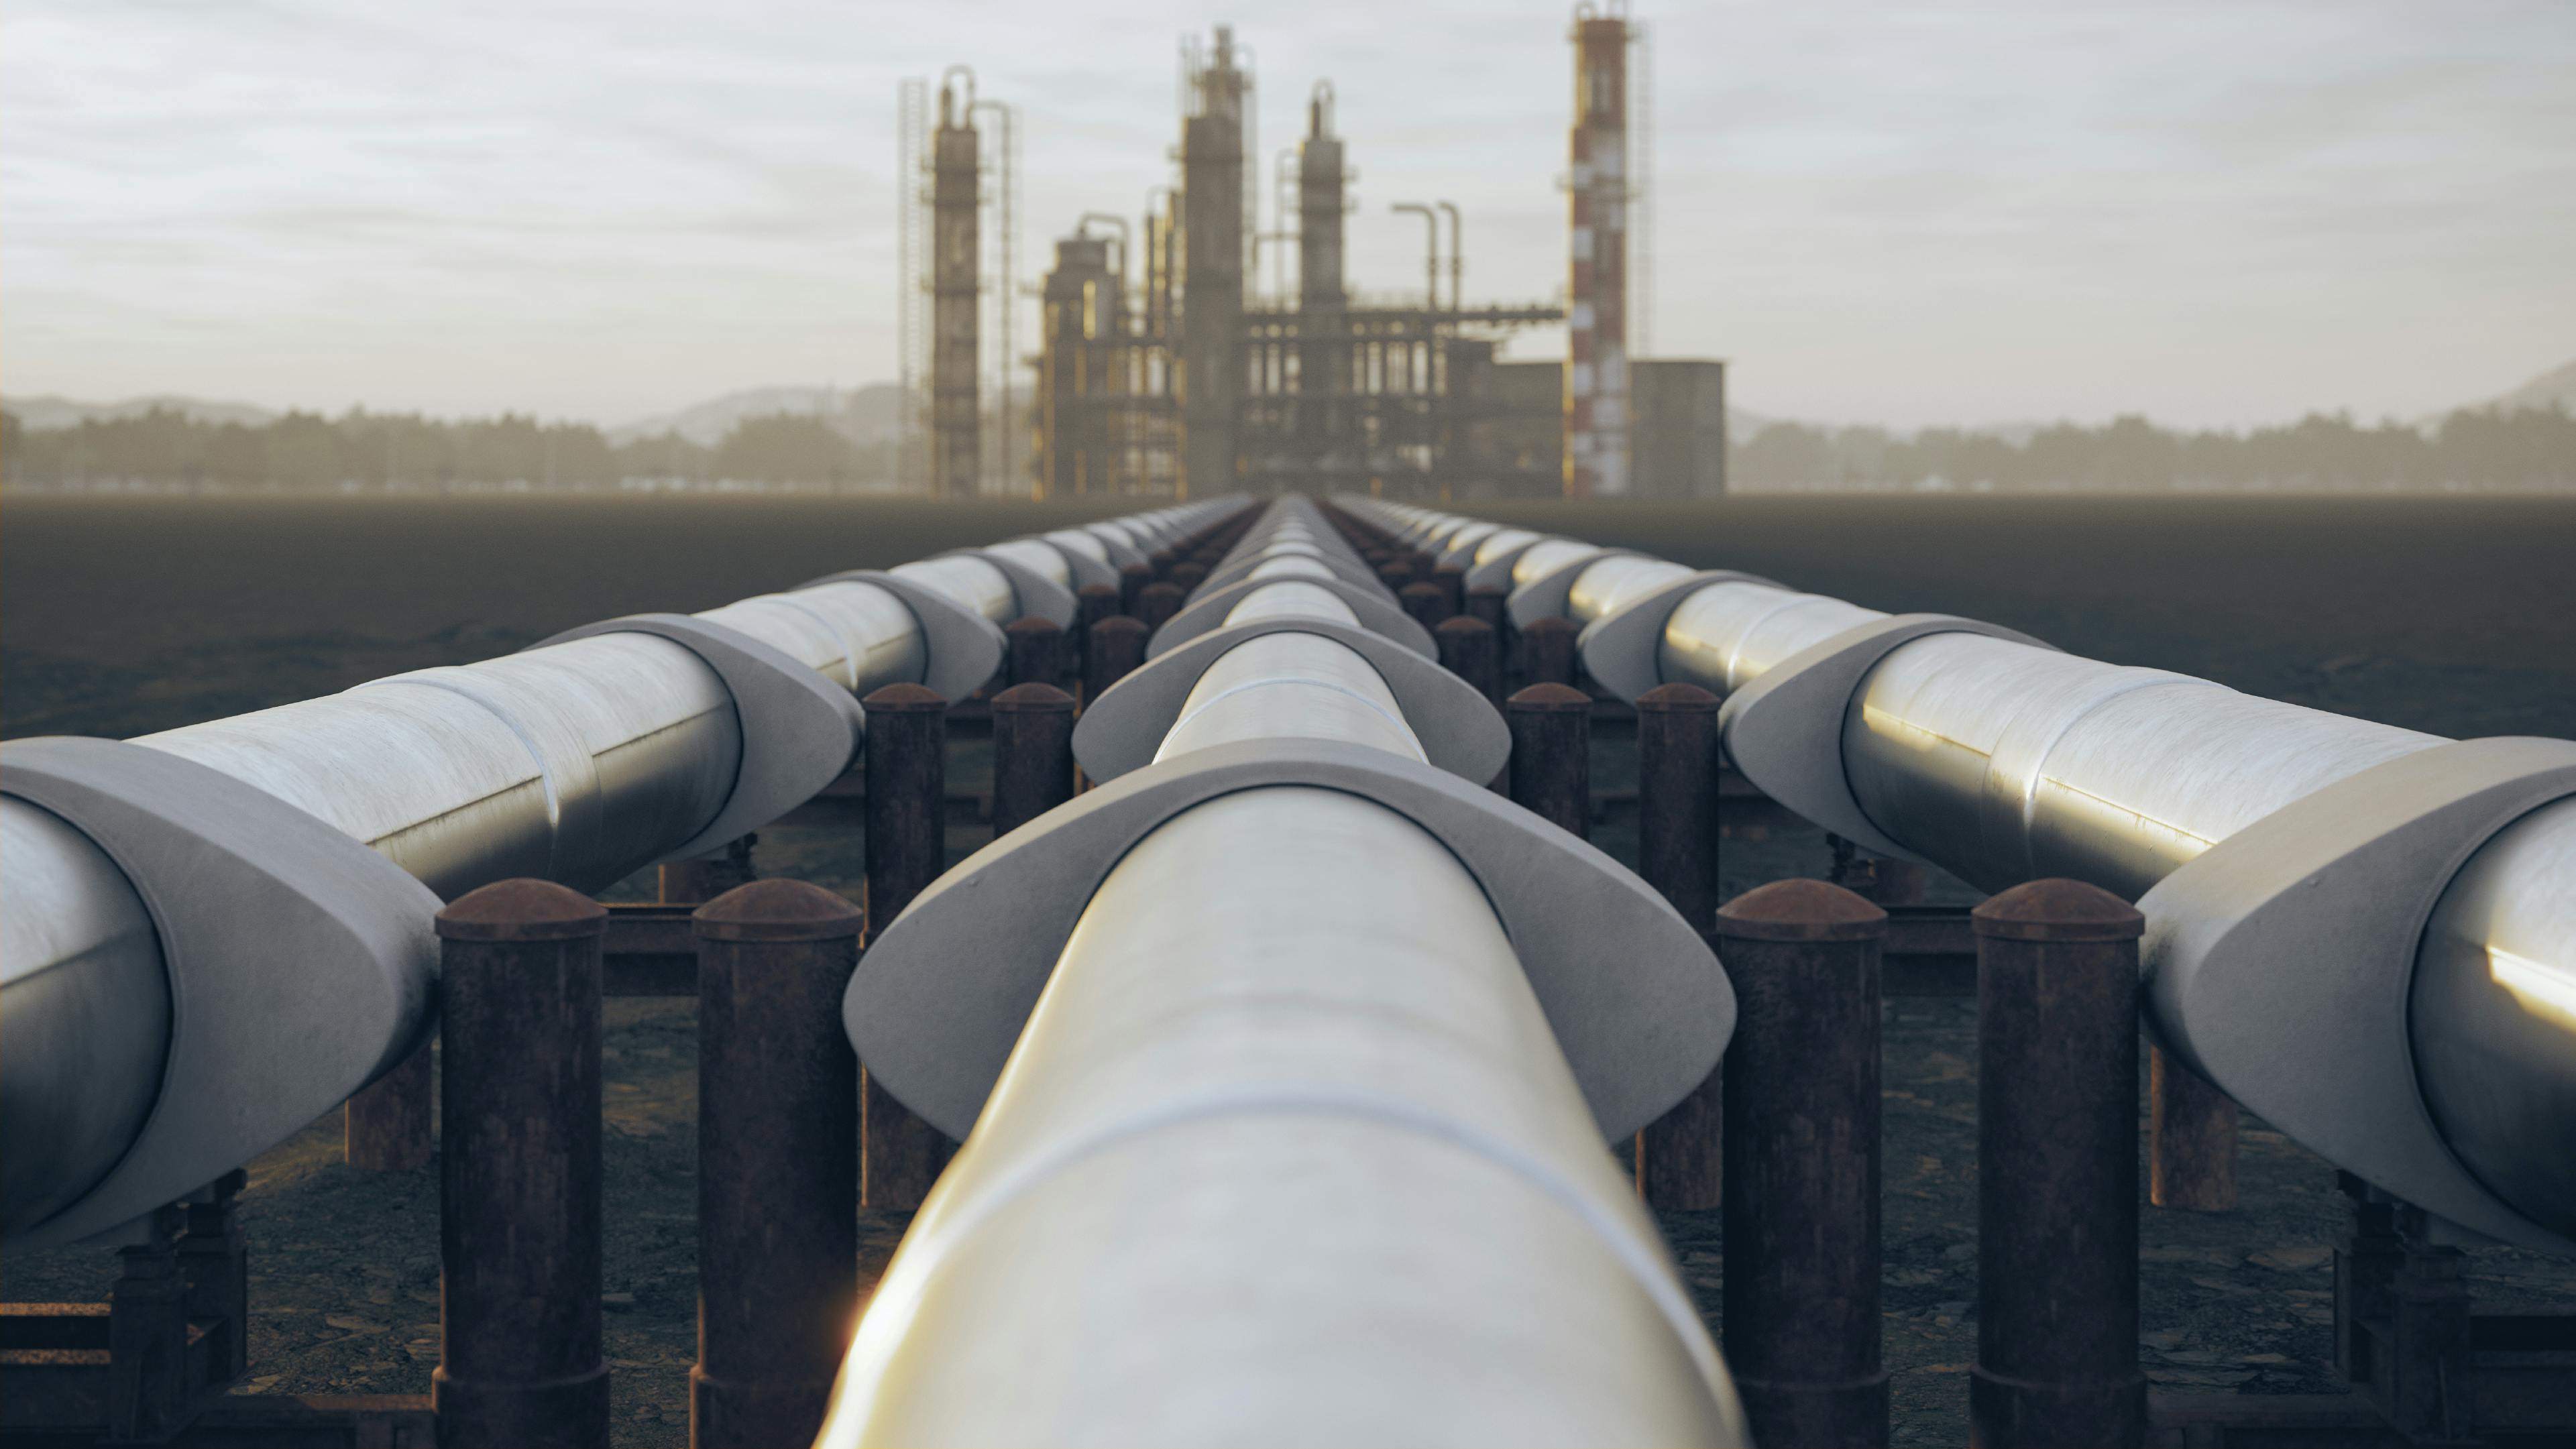 Oil and gas pipelines in front of a refinery.